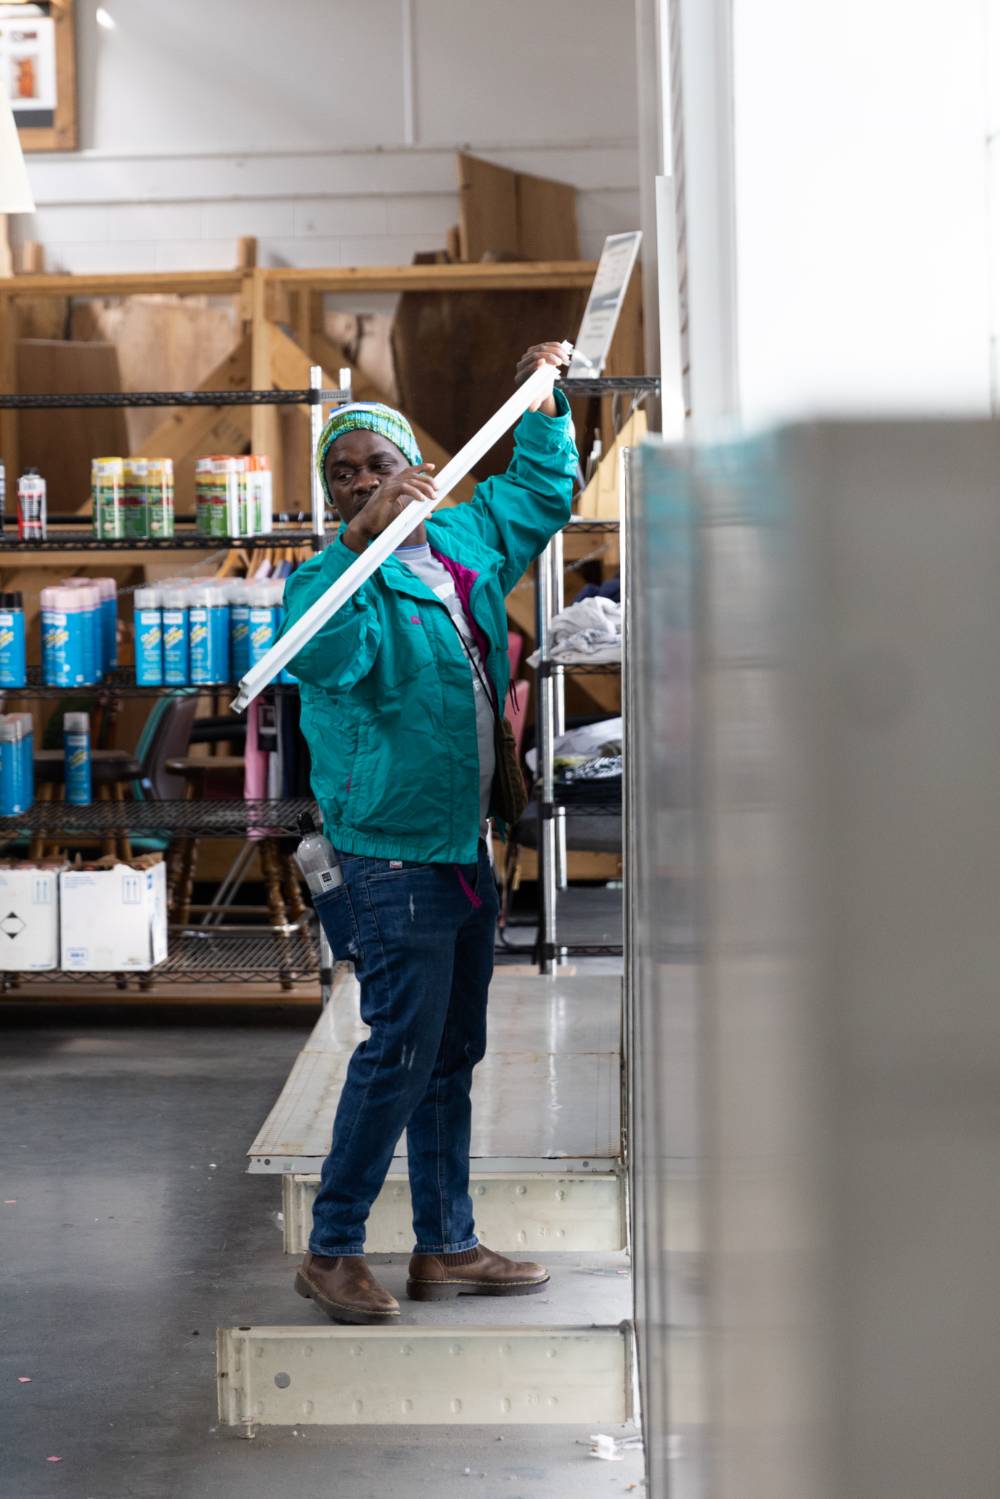 A participant helps put things on a shelf at Restore.